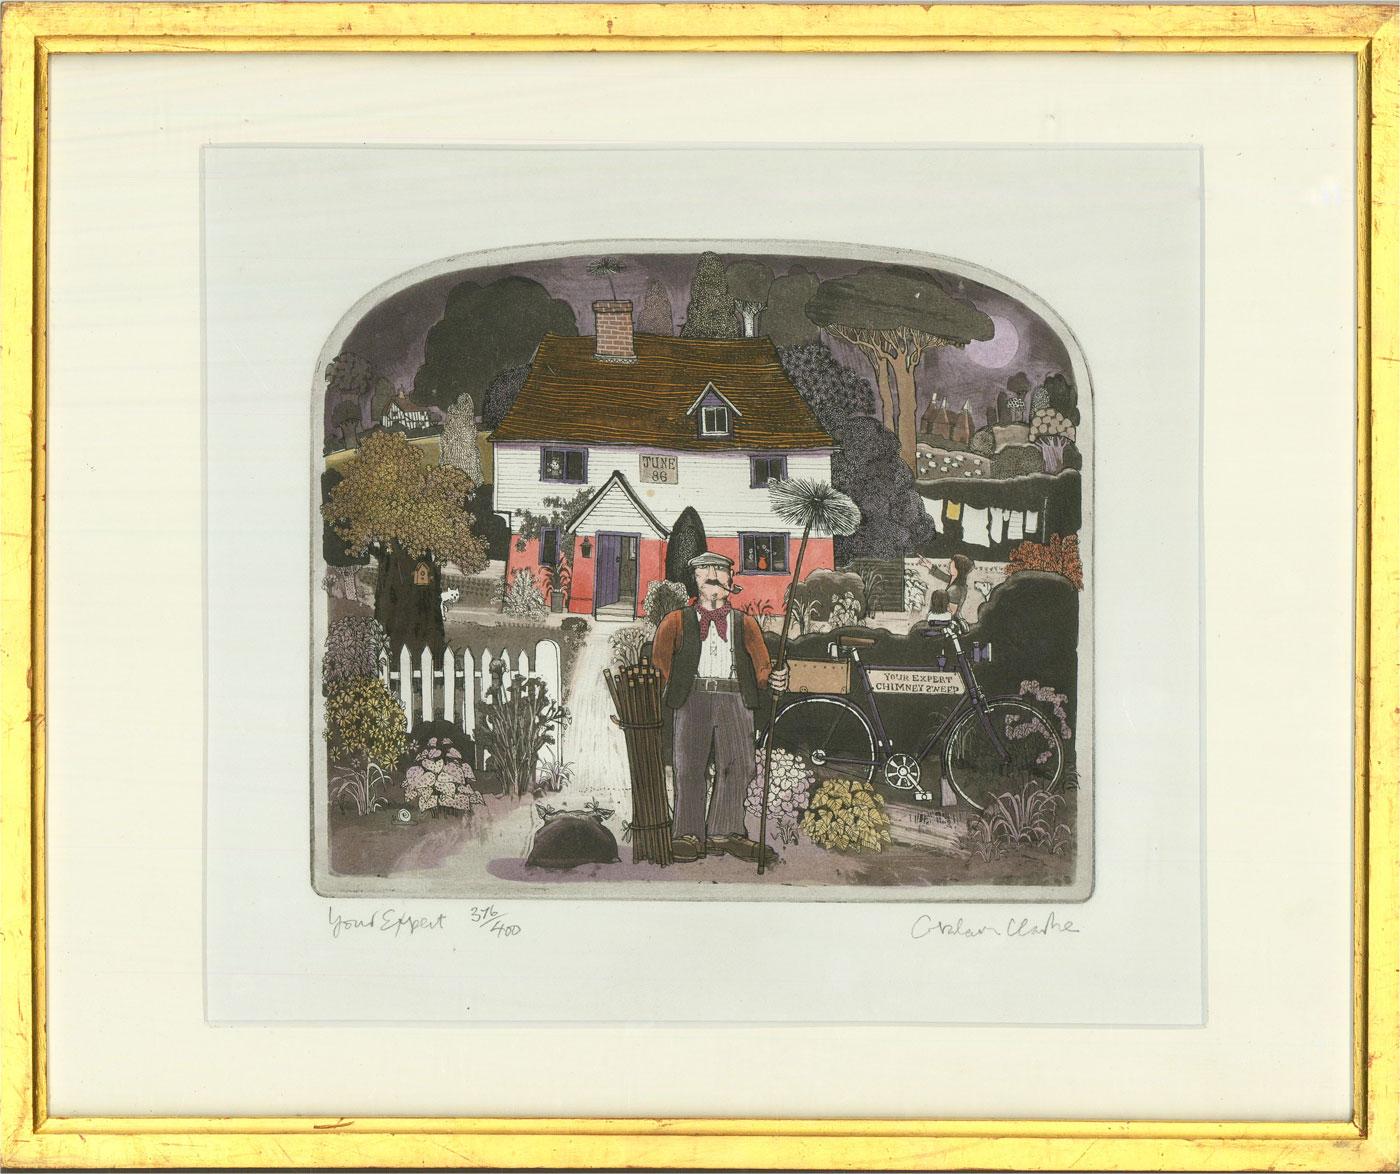 A charmingly naive etching in colour by the notable British printmaker, Graham Clarke. The scene depicts a cottage with a garden full of plants and trees. A chimney stands in front of the garden gate with his bicycle, proudly holding his broom.